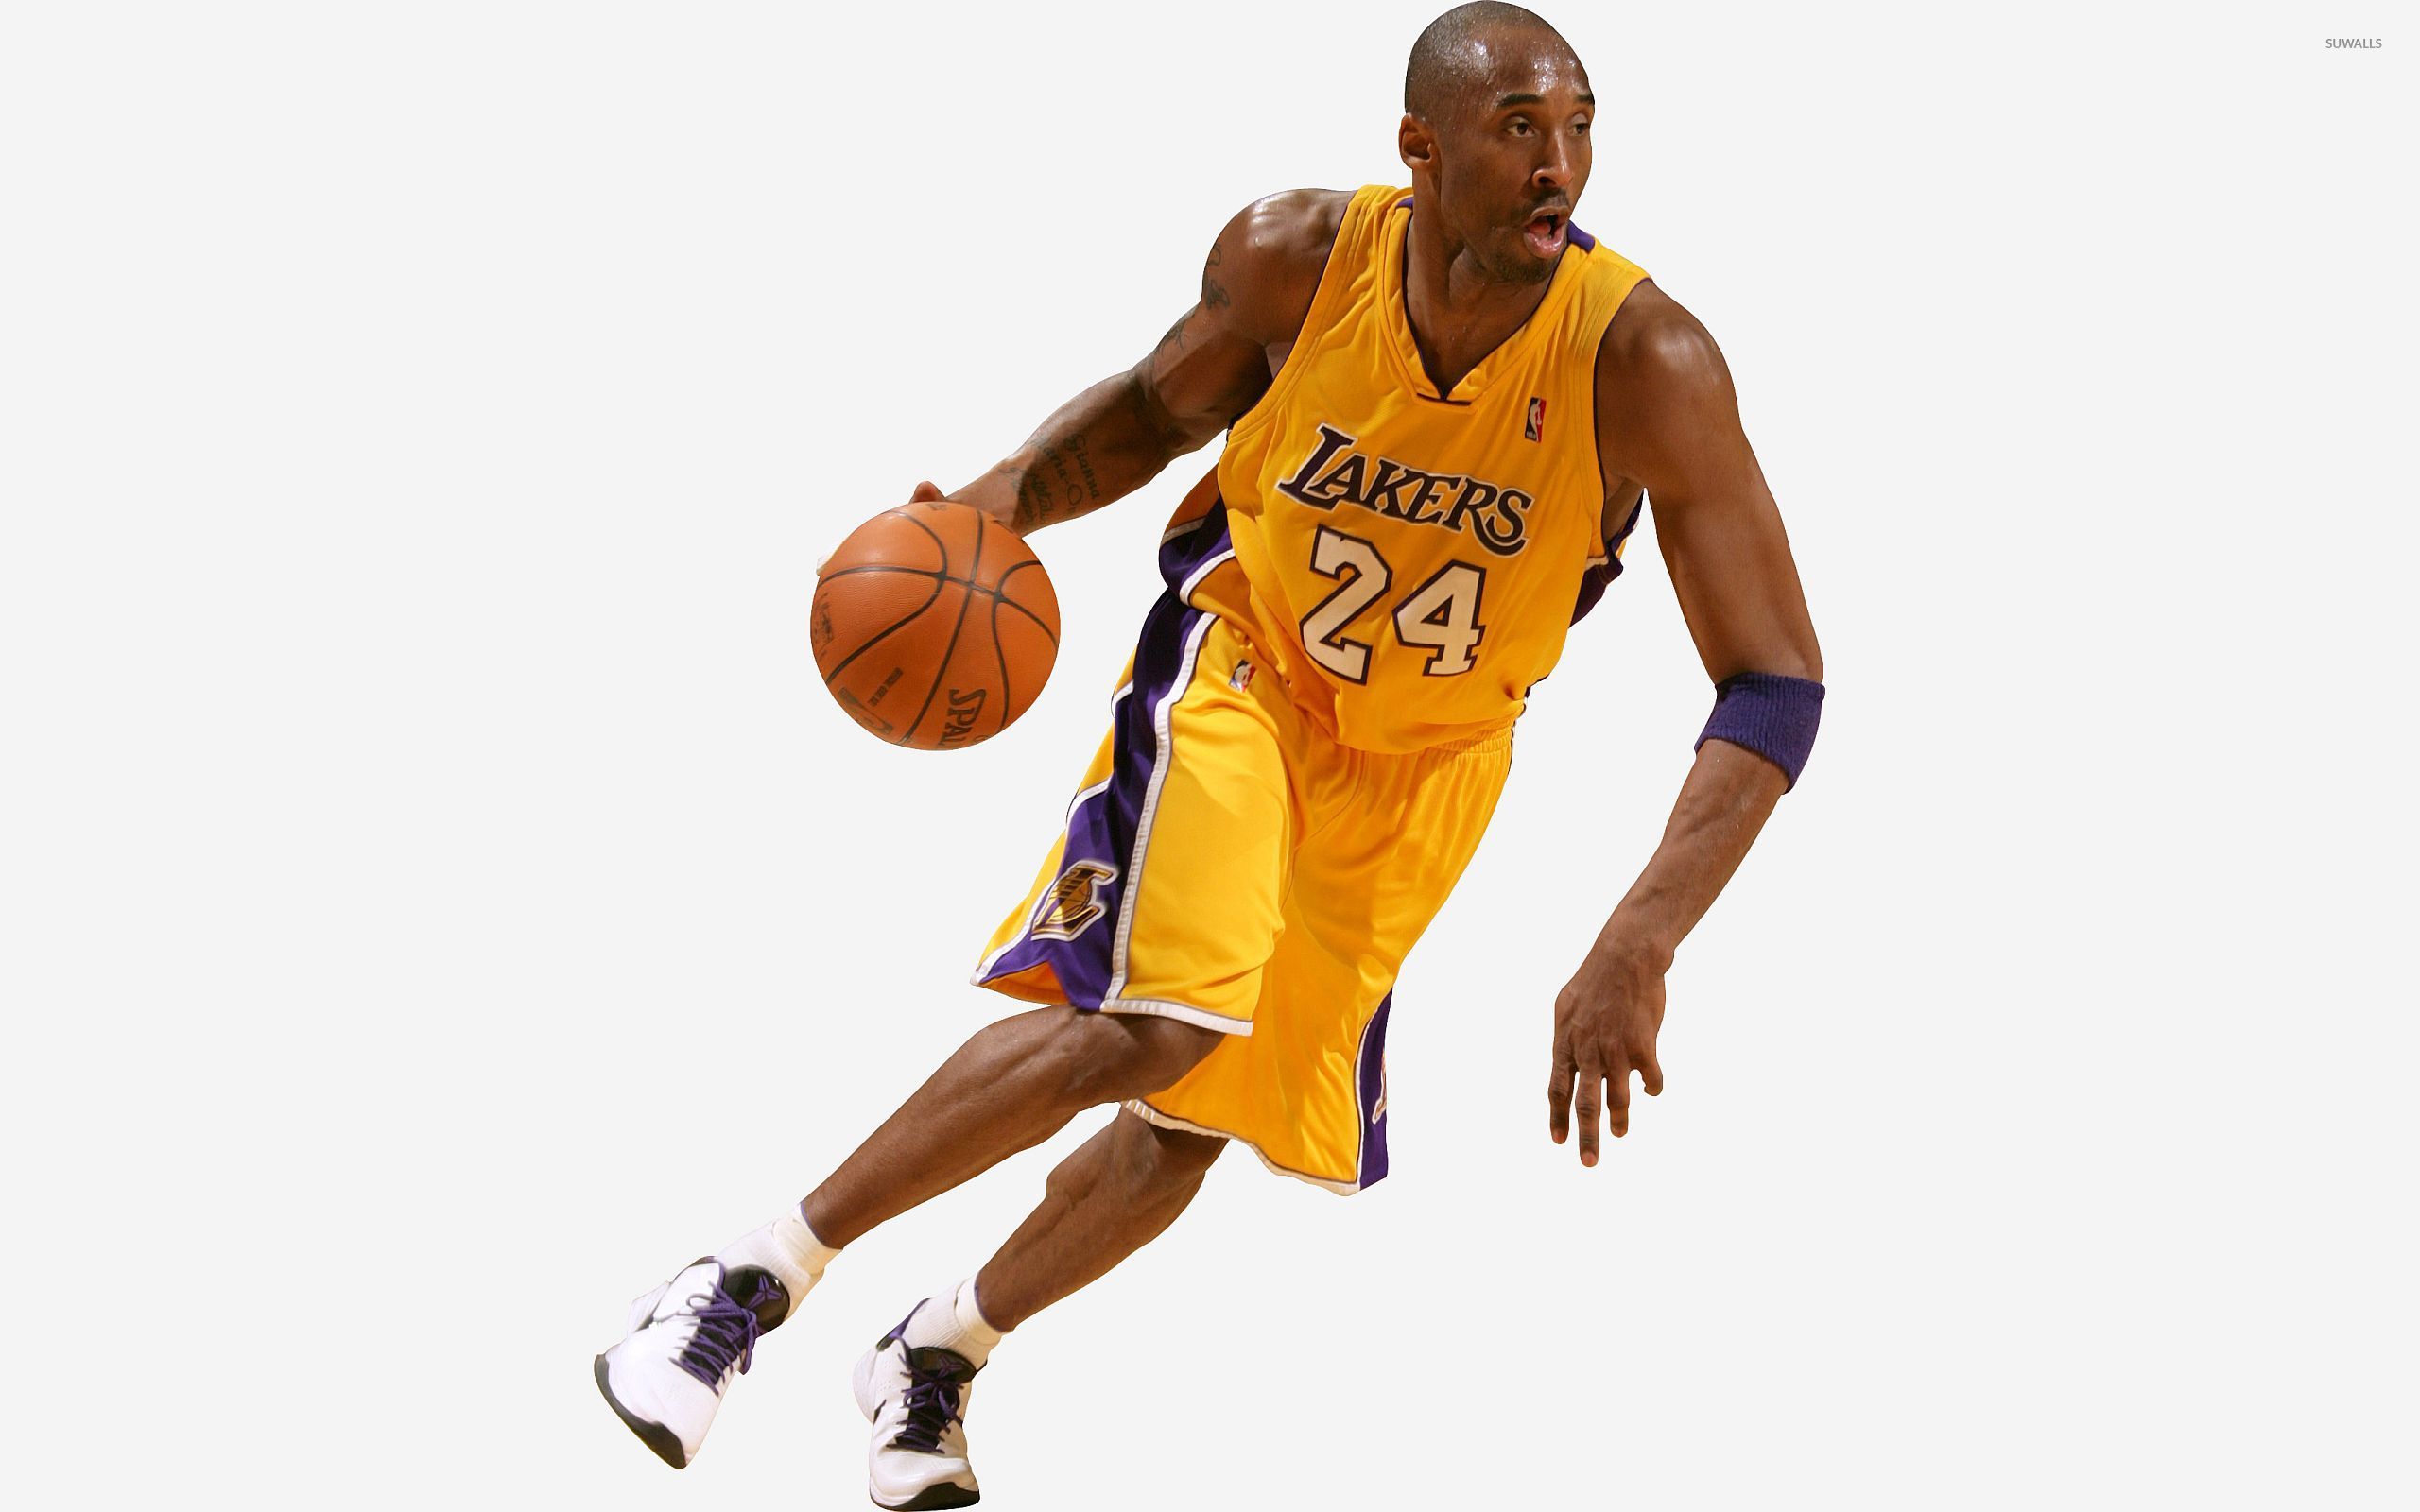 561 Kobe Bryant Images, Stock Photos, 3D objects, & Vectors